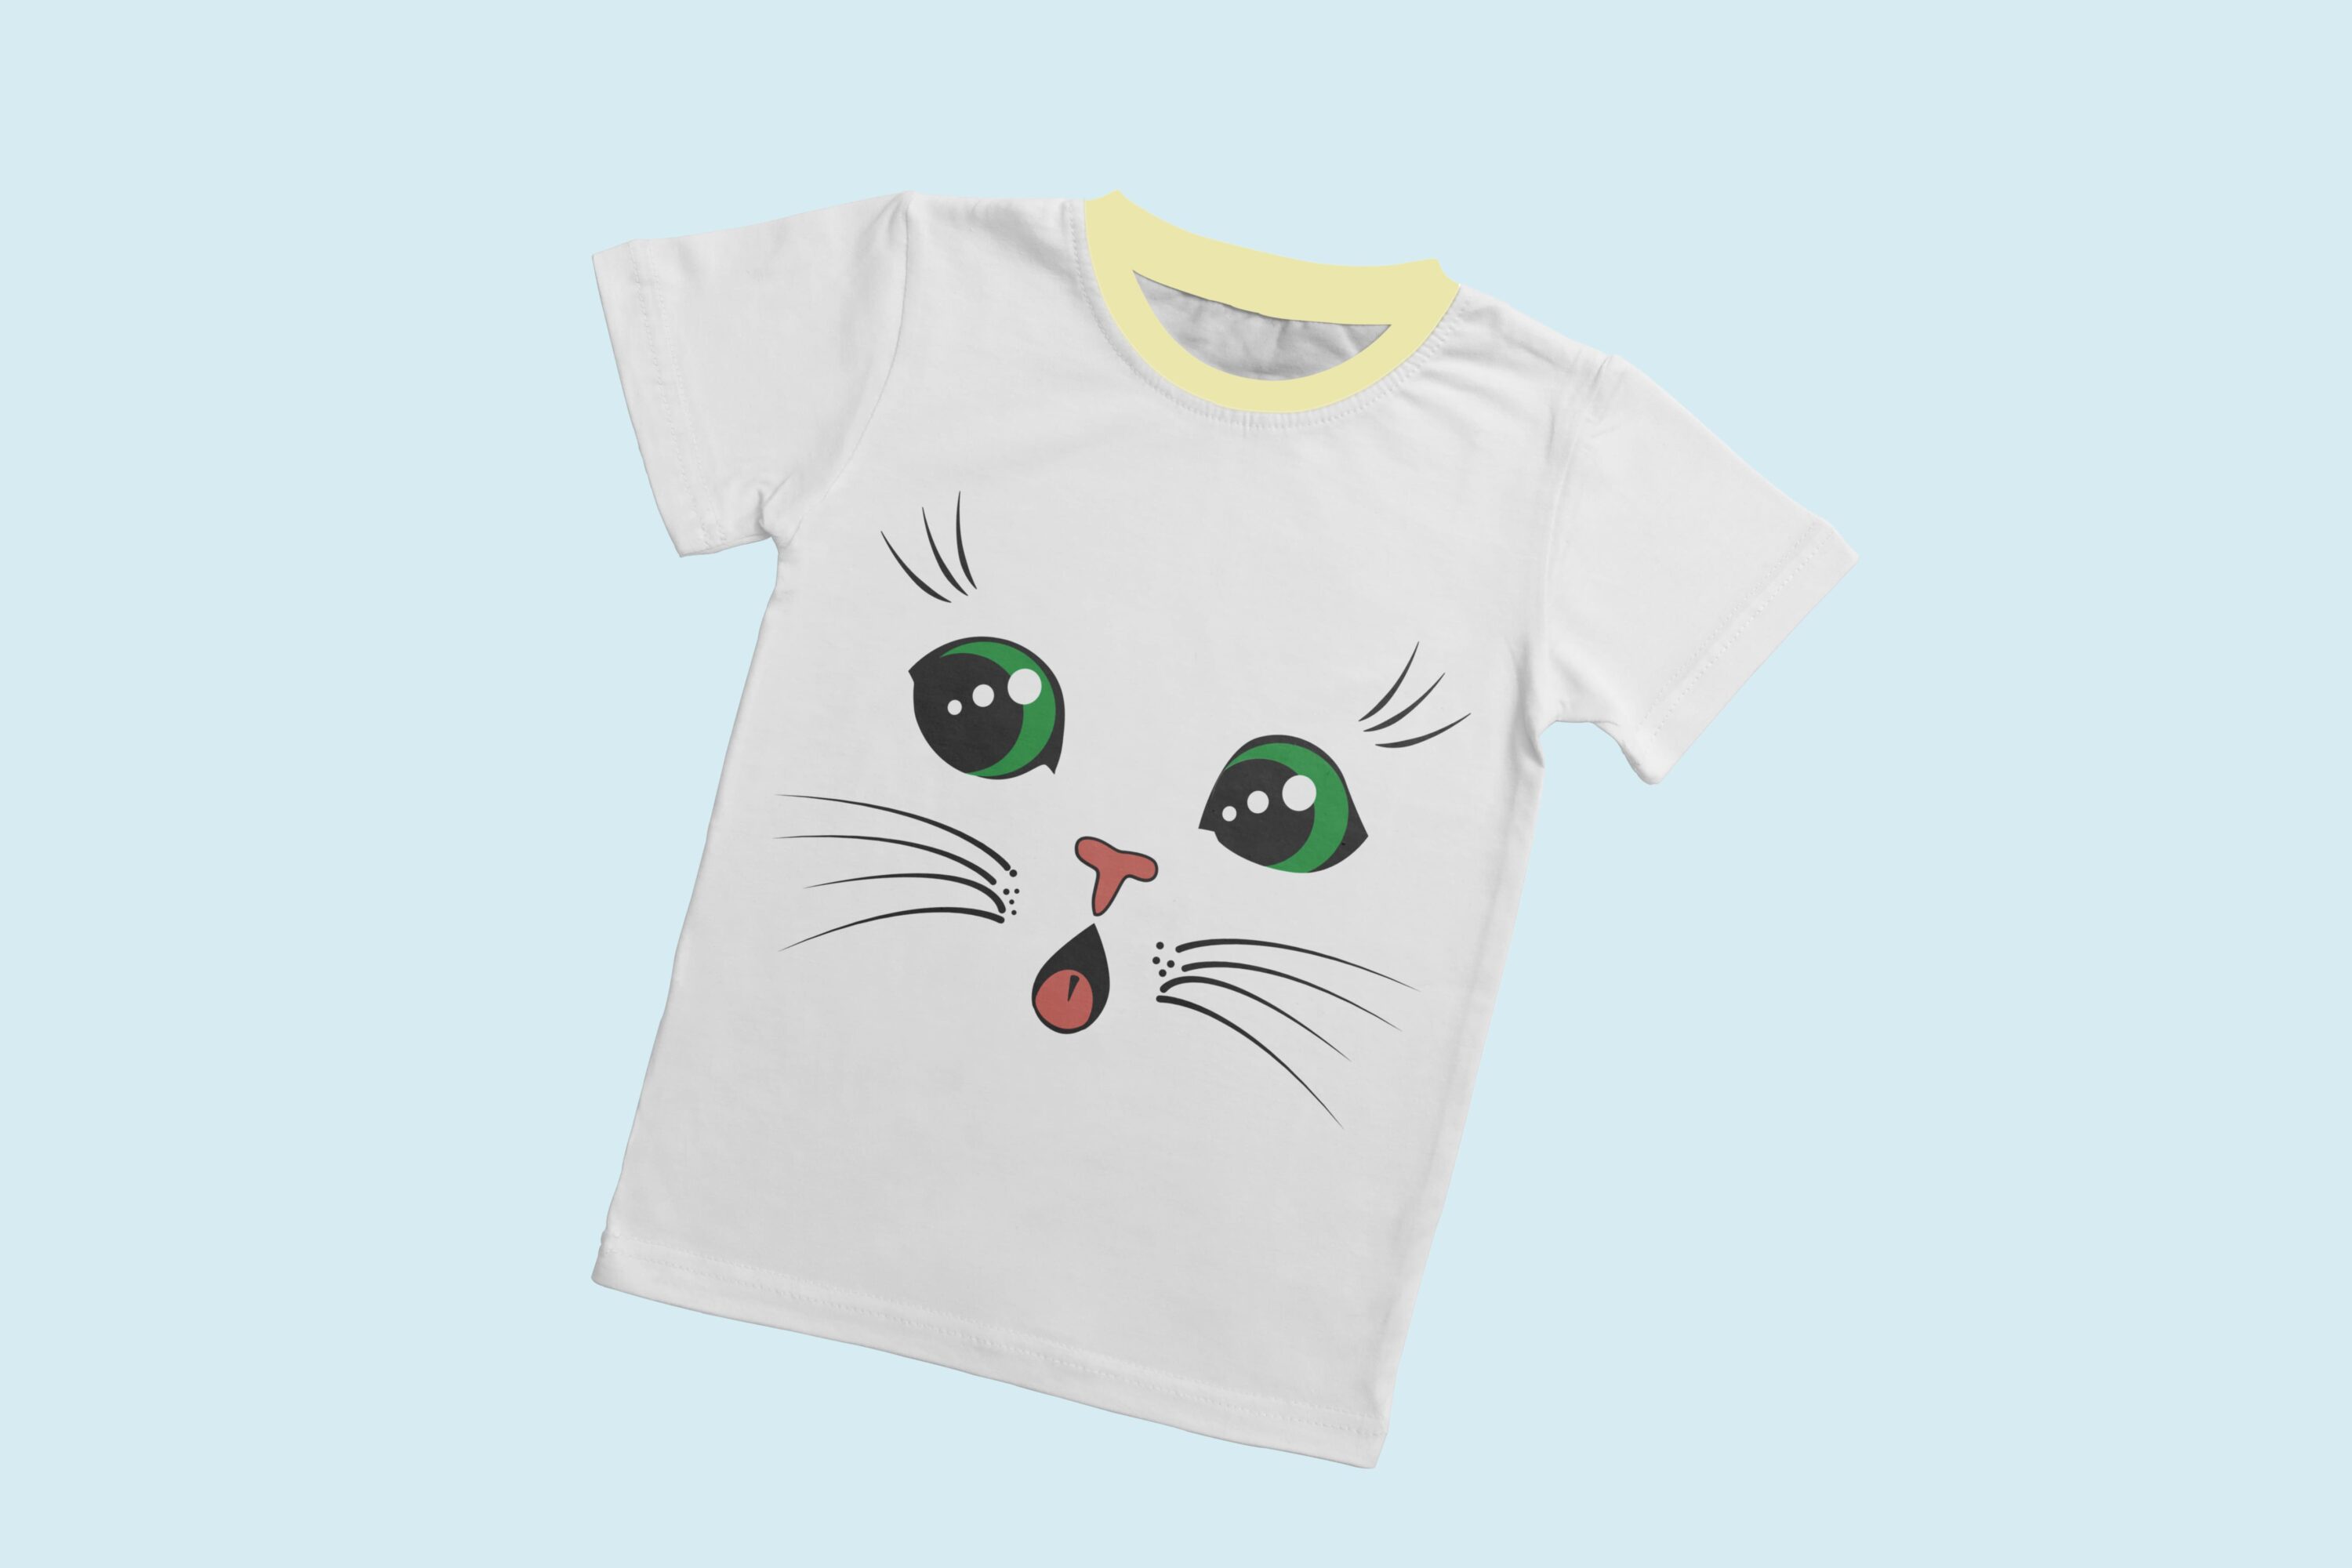 A white t-shirt with a light yellow collar and the face of a surprised cat with green eyes.